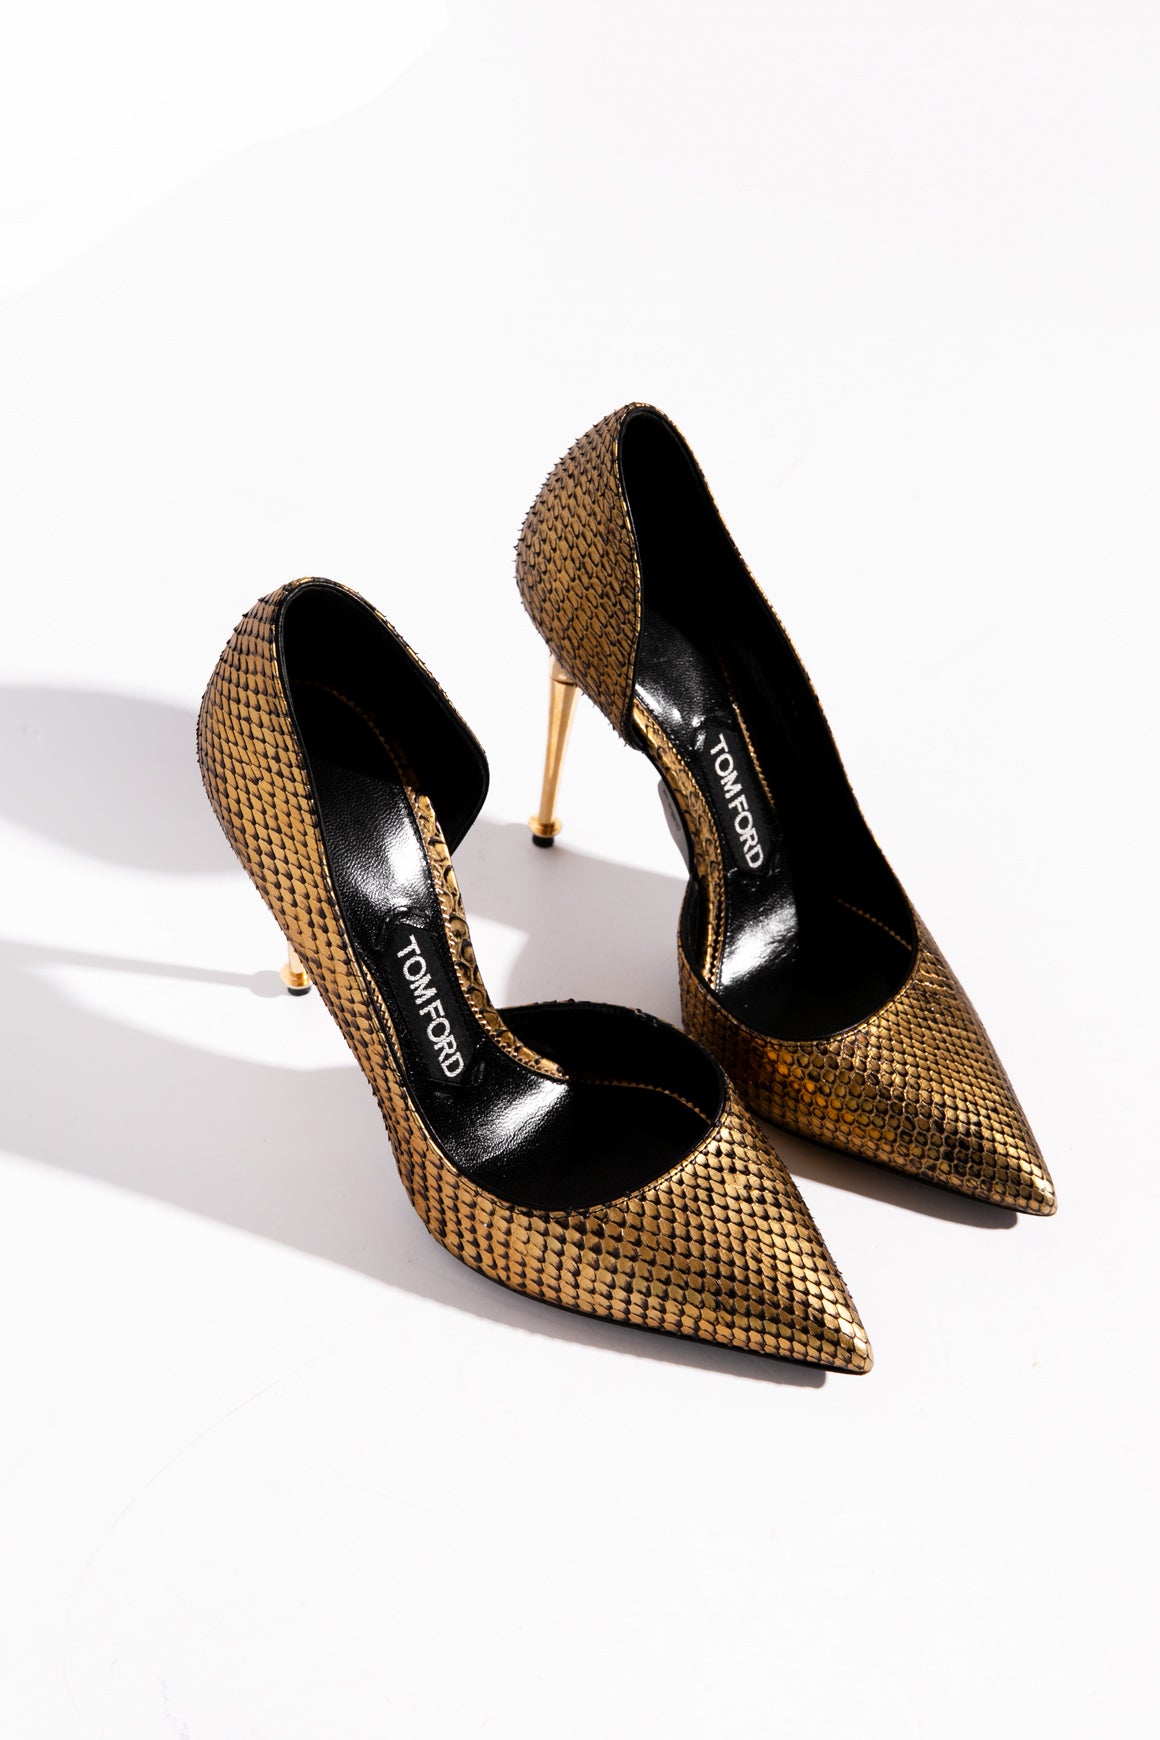 TOM FORD Gold Scaled Pumps (Sz. 36.5)